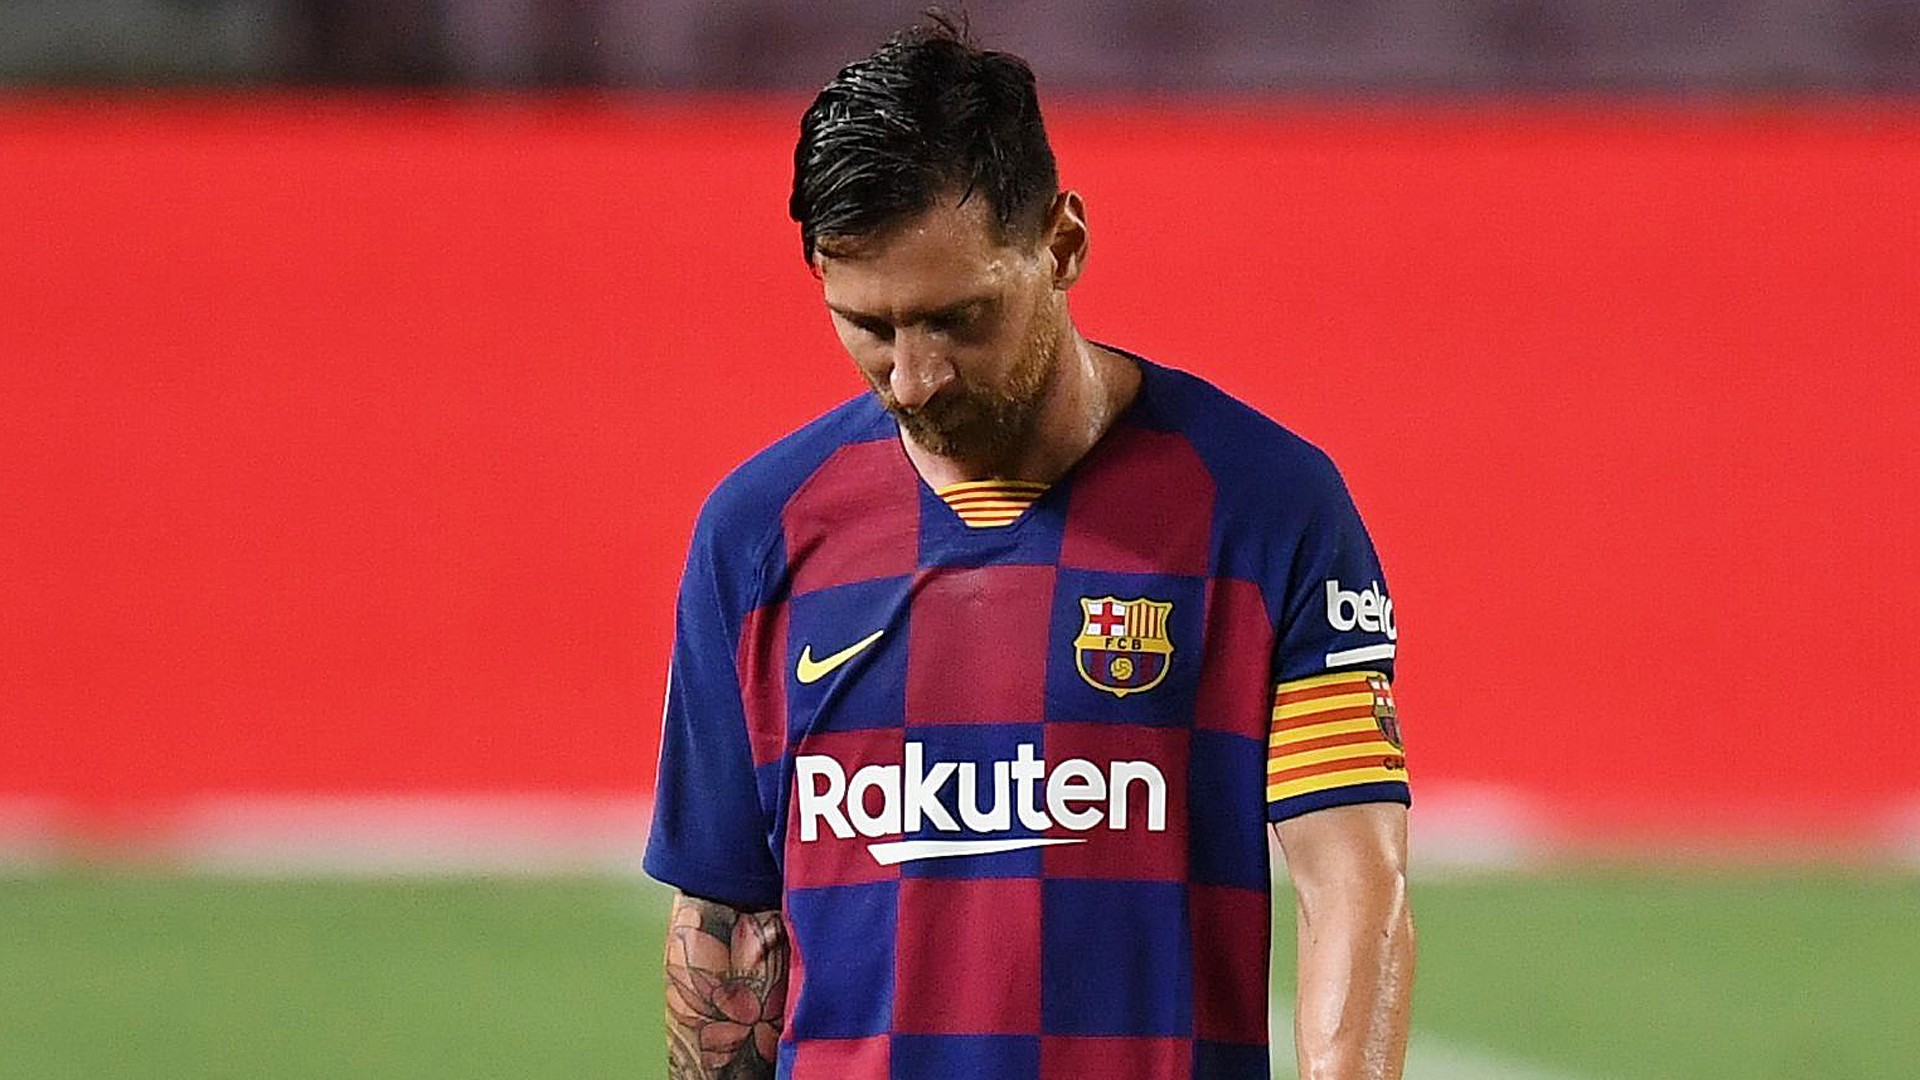 ‘Messi’s history with Barcelona can't be broken’ – Argentine star remains ‘non-transferable’, says Rousaud